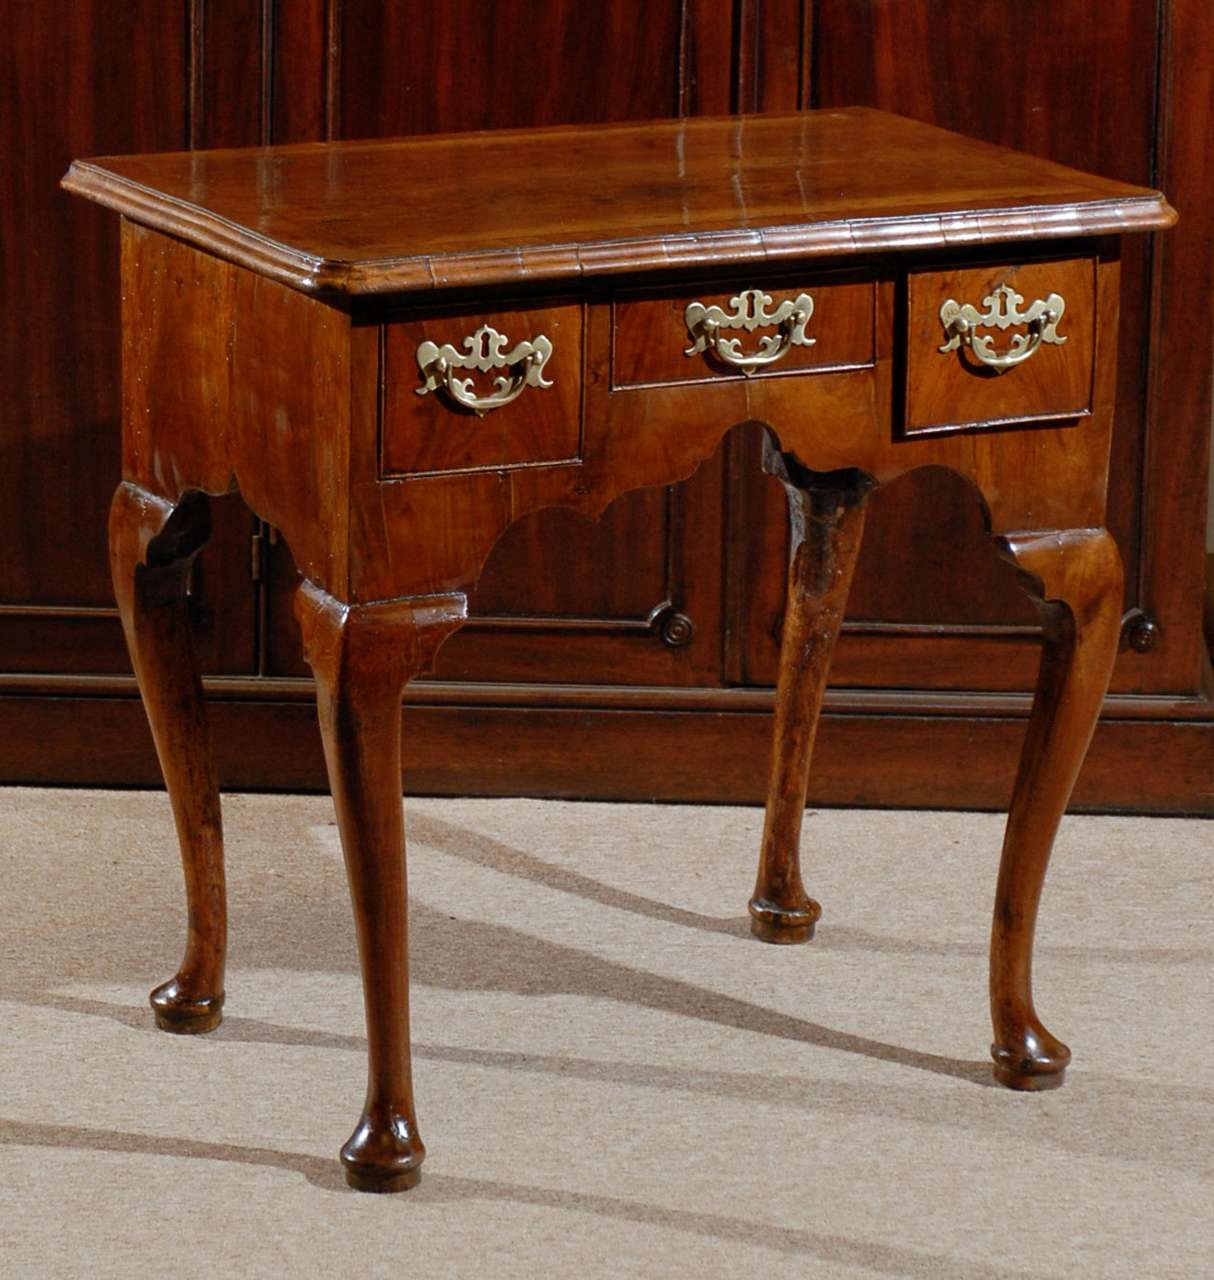 A Walnut Lowboy with Three Drawers, Cross-banded Top, Shaped Apron and Cabriole Legs terminating in Pad Feet - dating from the first quarter of the 18th Century and English in origin.

TO SEE ALL OF OUR INVENTORY PLEASE VISIT OUR